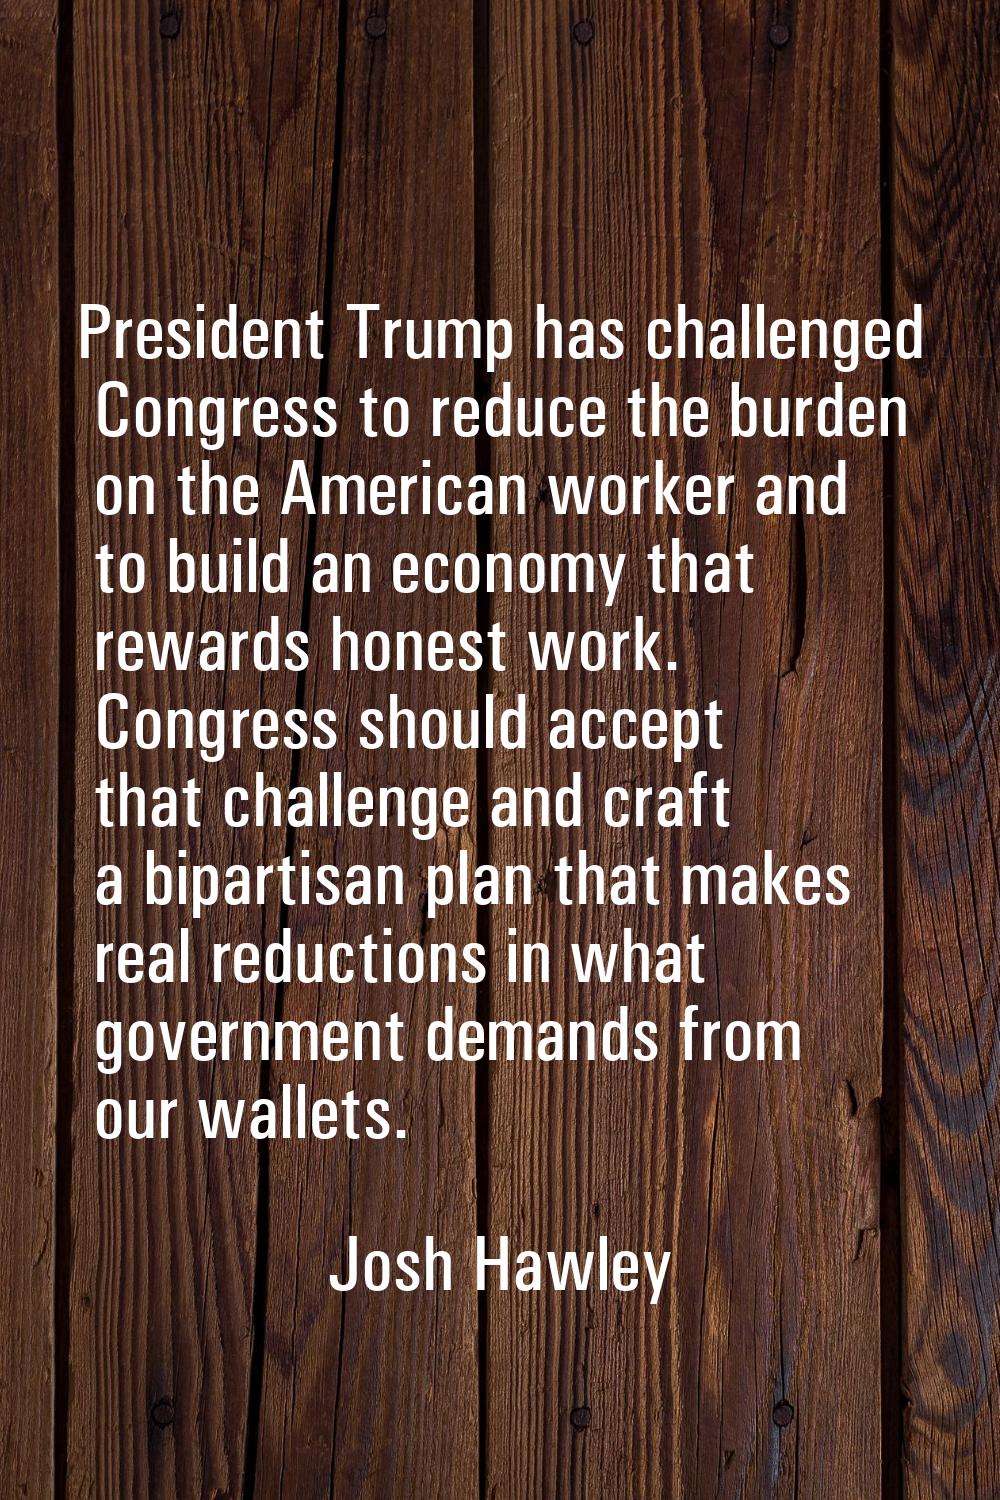 President Trump has challenged Congress to reduce the burden on the American worker and to build an